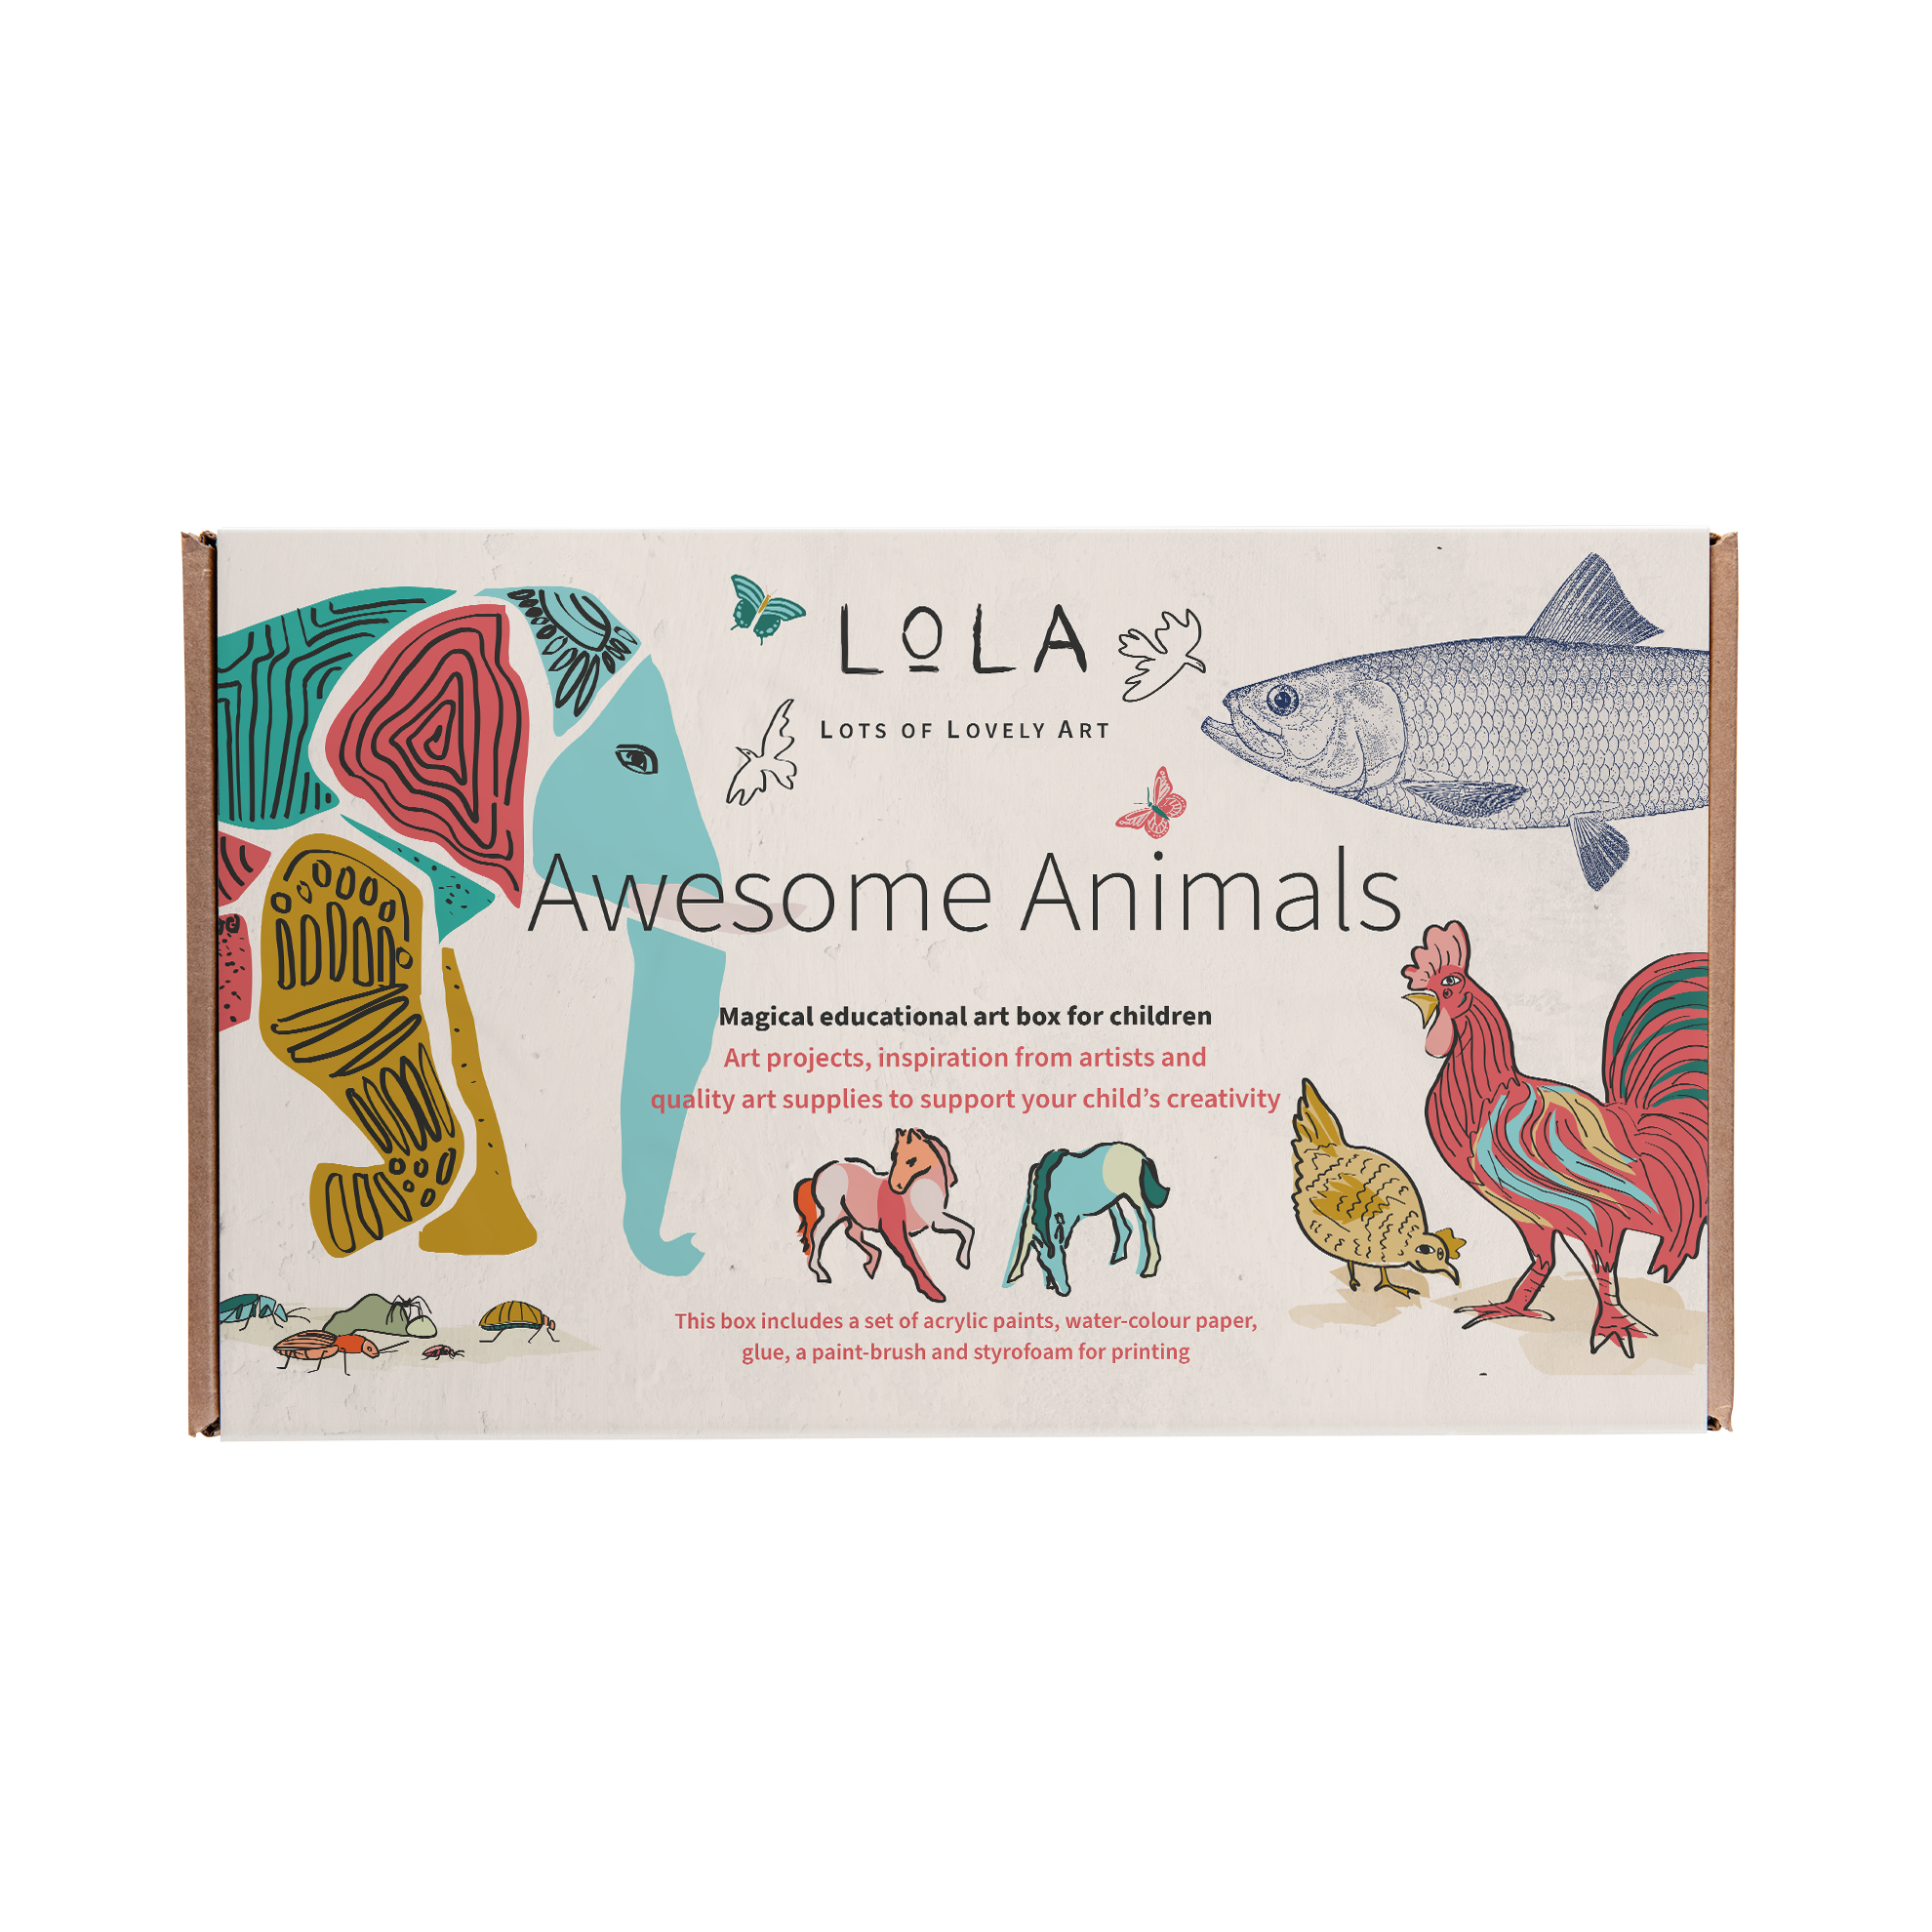 Lots of Lovely Art Awesome Animals Art Box for Children